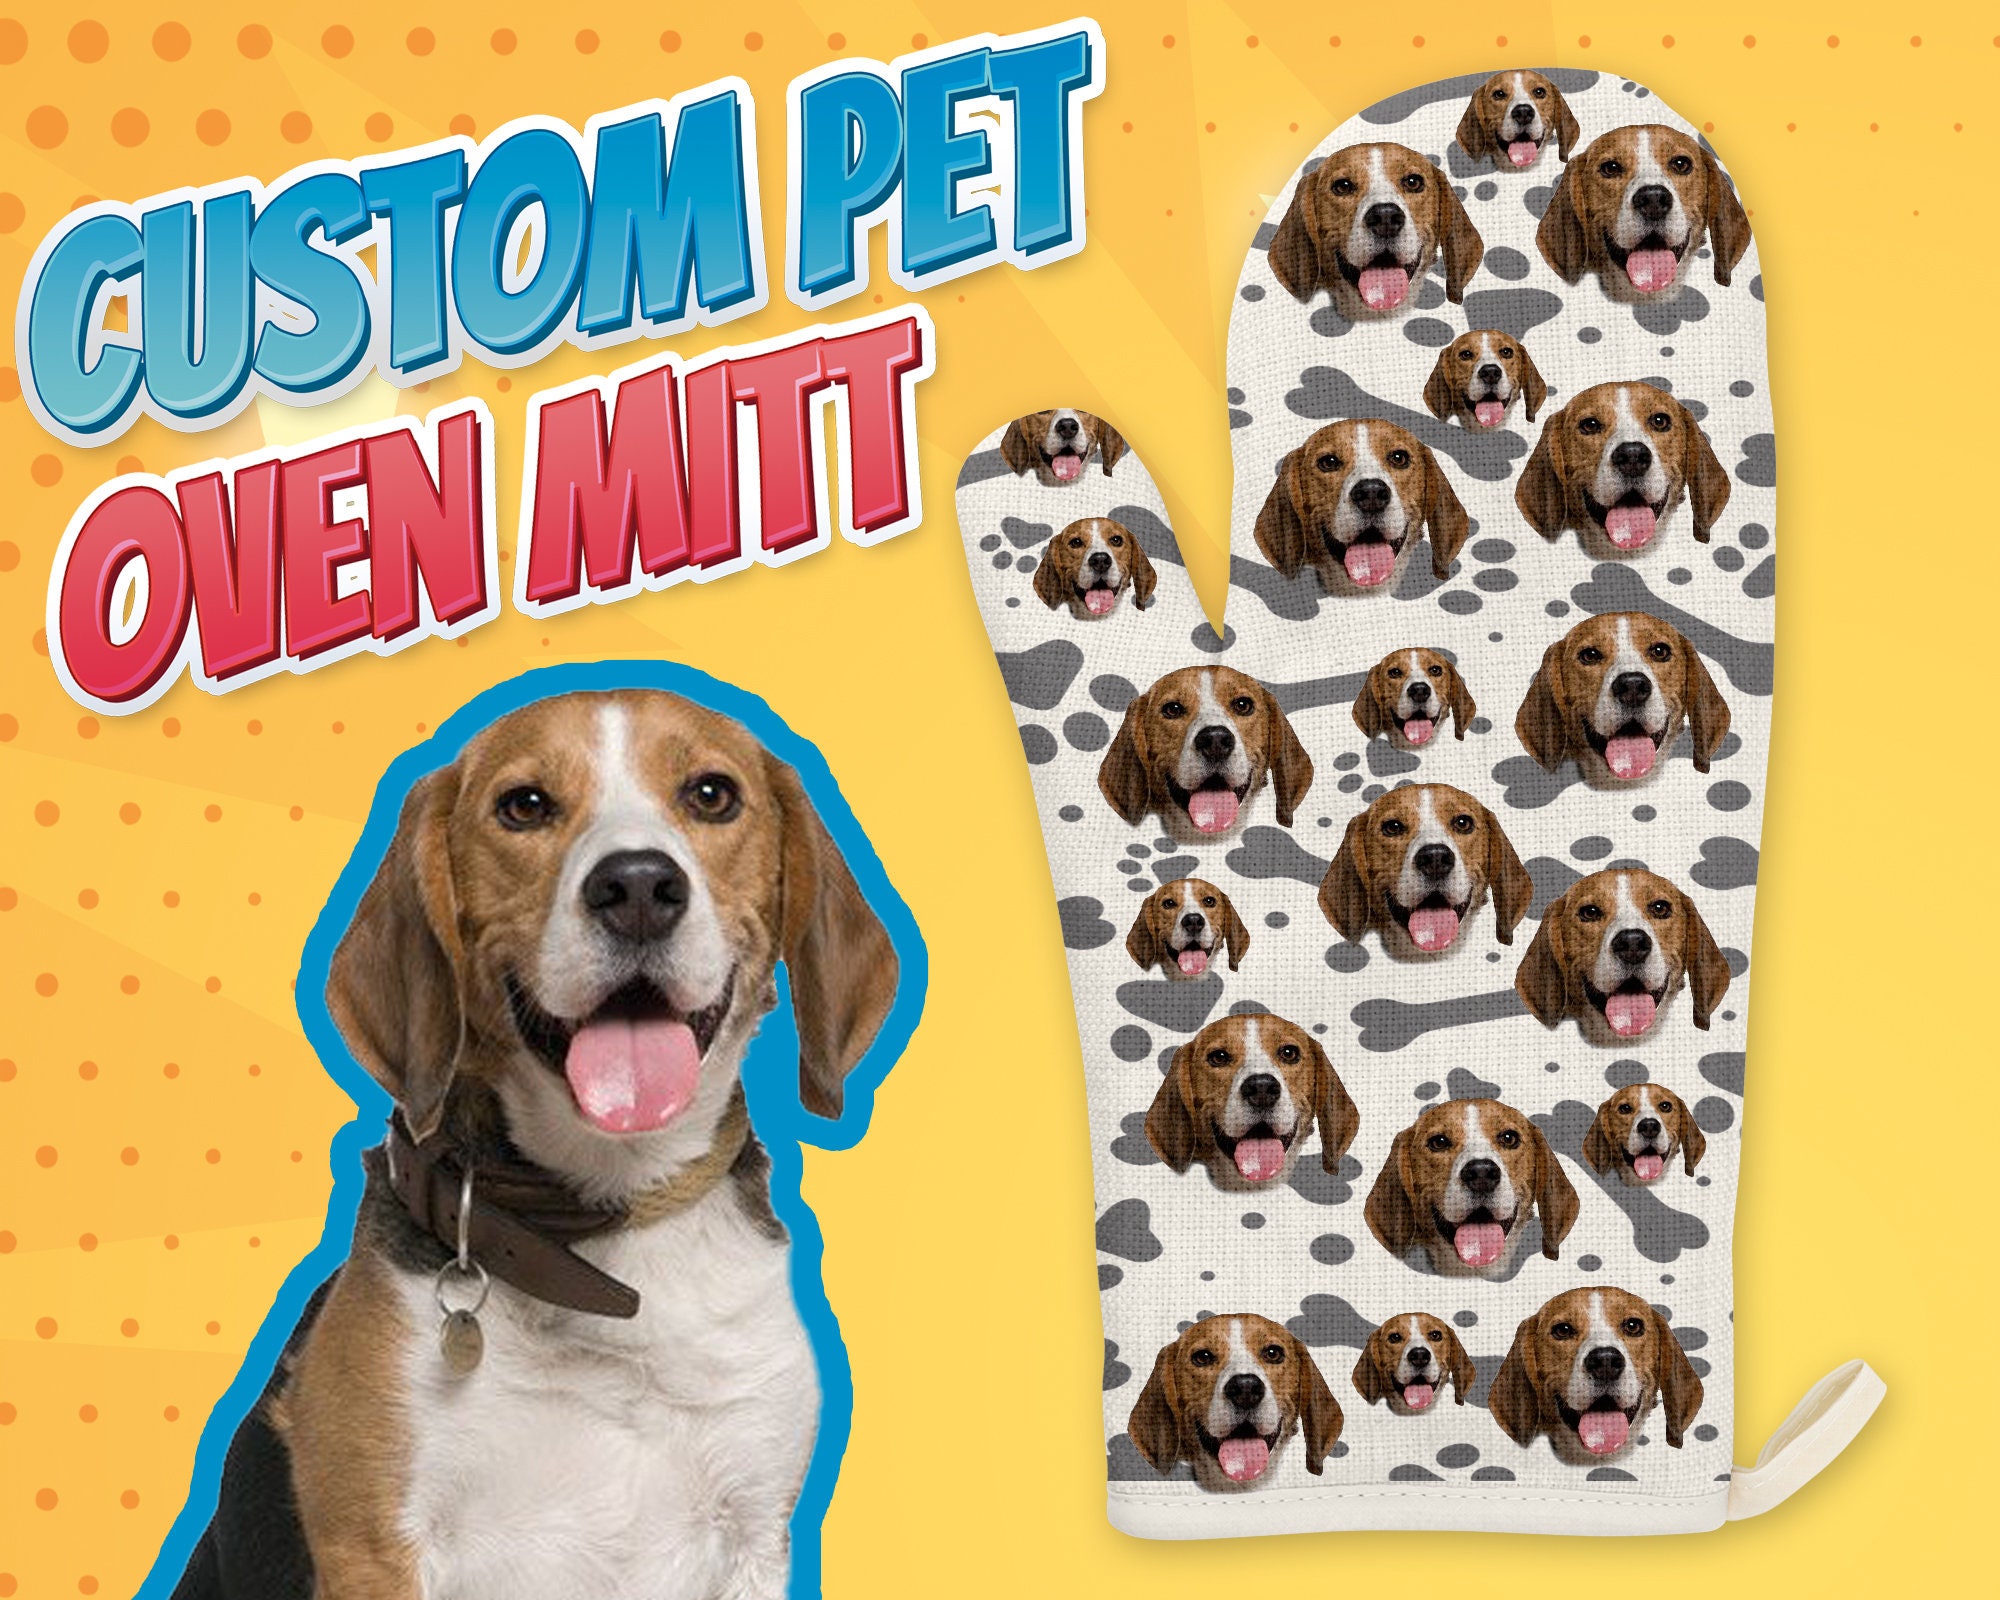 Personalized Oven Mitts, Customized Dog Oven Mitts, Funny Oven